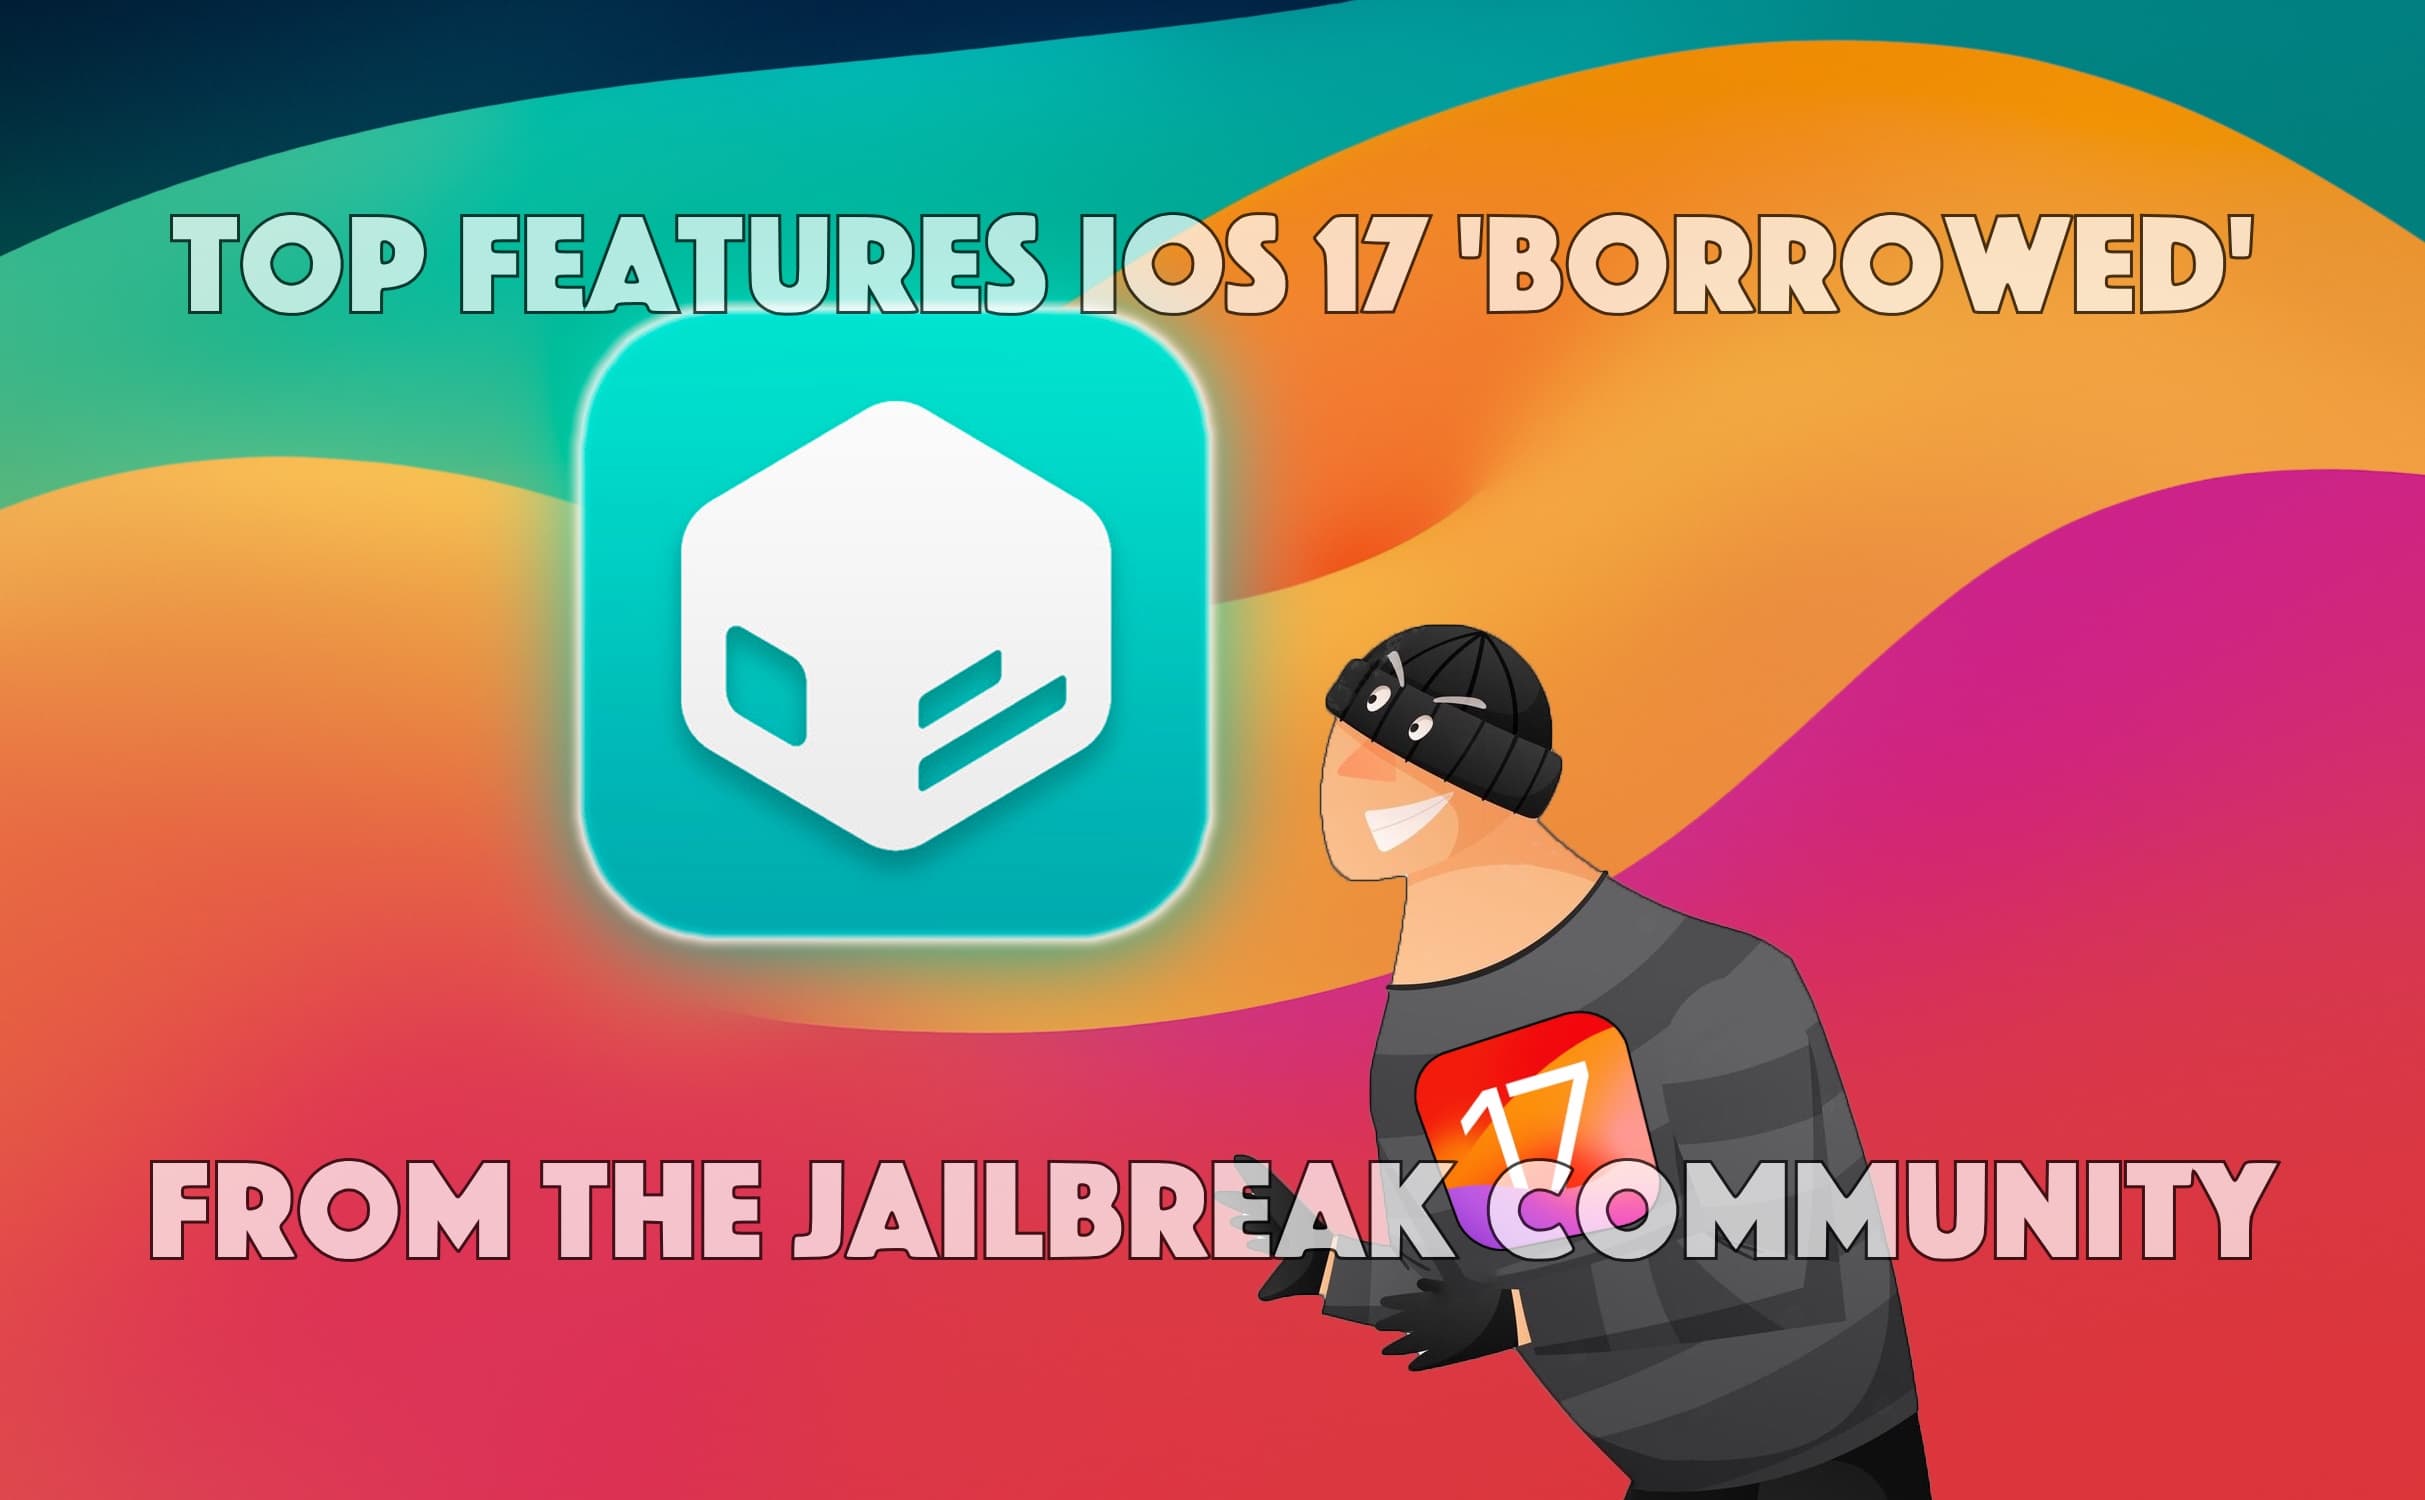 Features that iOS 17 stole from the jailbreak community.